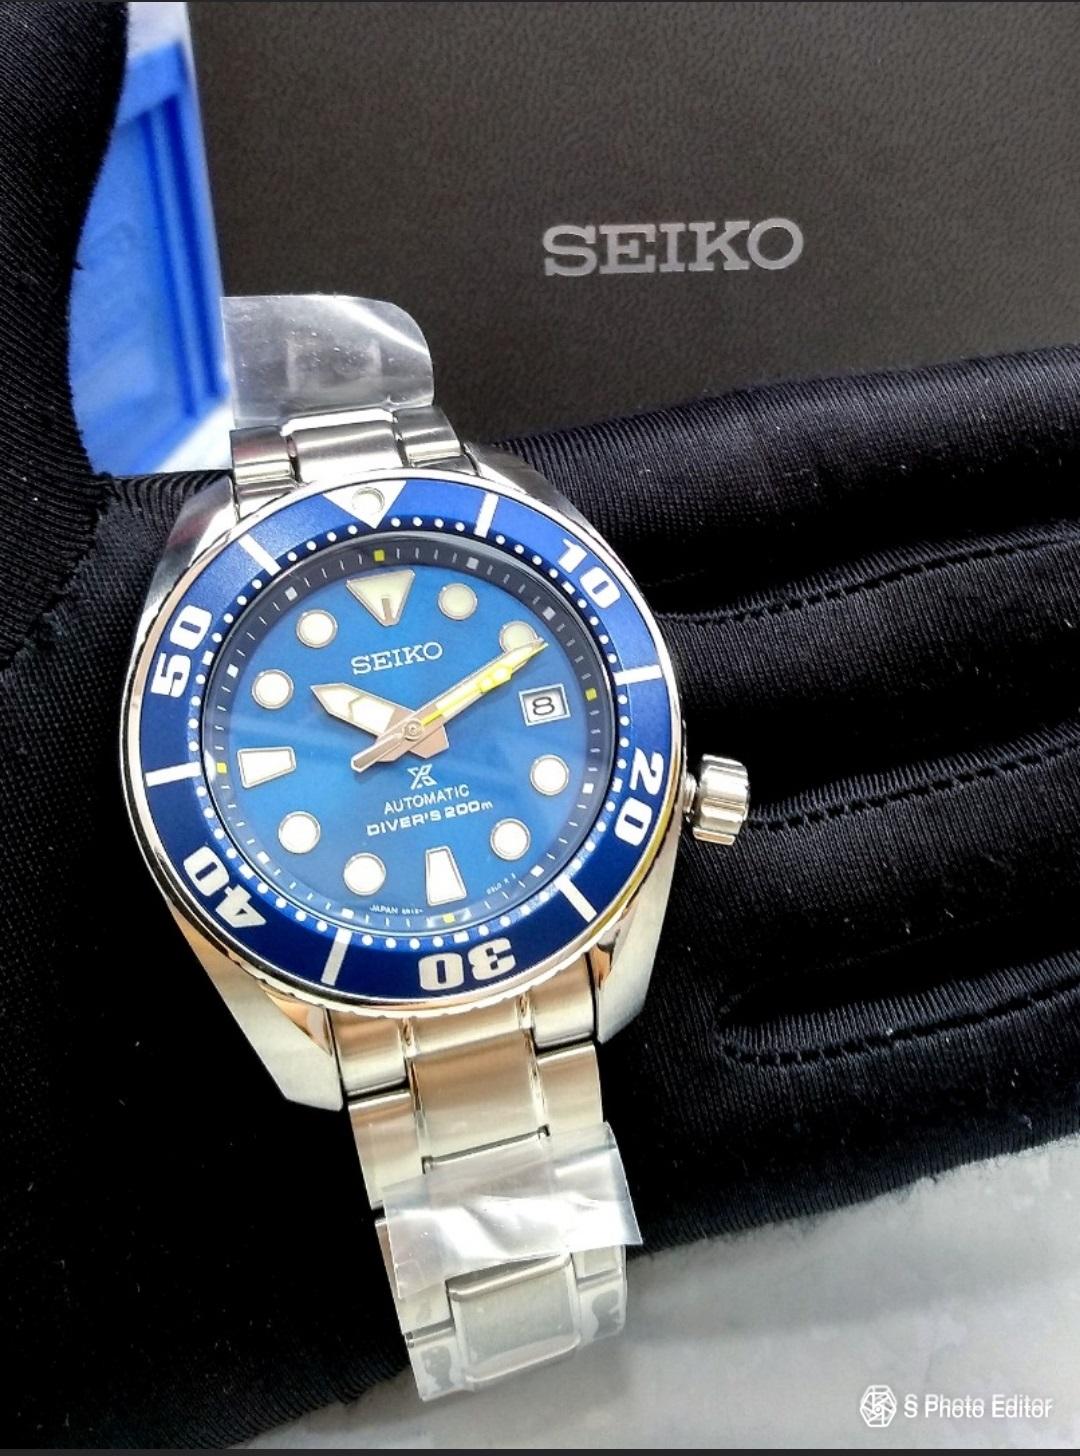 JAPAN DOMESTIC MODEL * BRAND NEW MADE IN JAPAN SEIKO PROSPEX CORAL BLUE  SUMO MENS AUTOMATIC DIVERS WATCH SBDC069 | Lazada PH